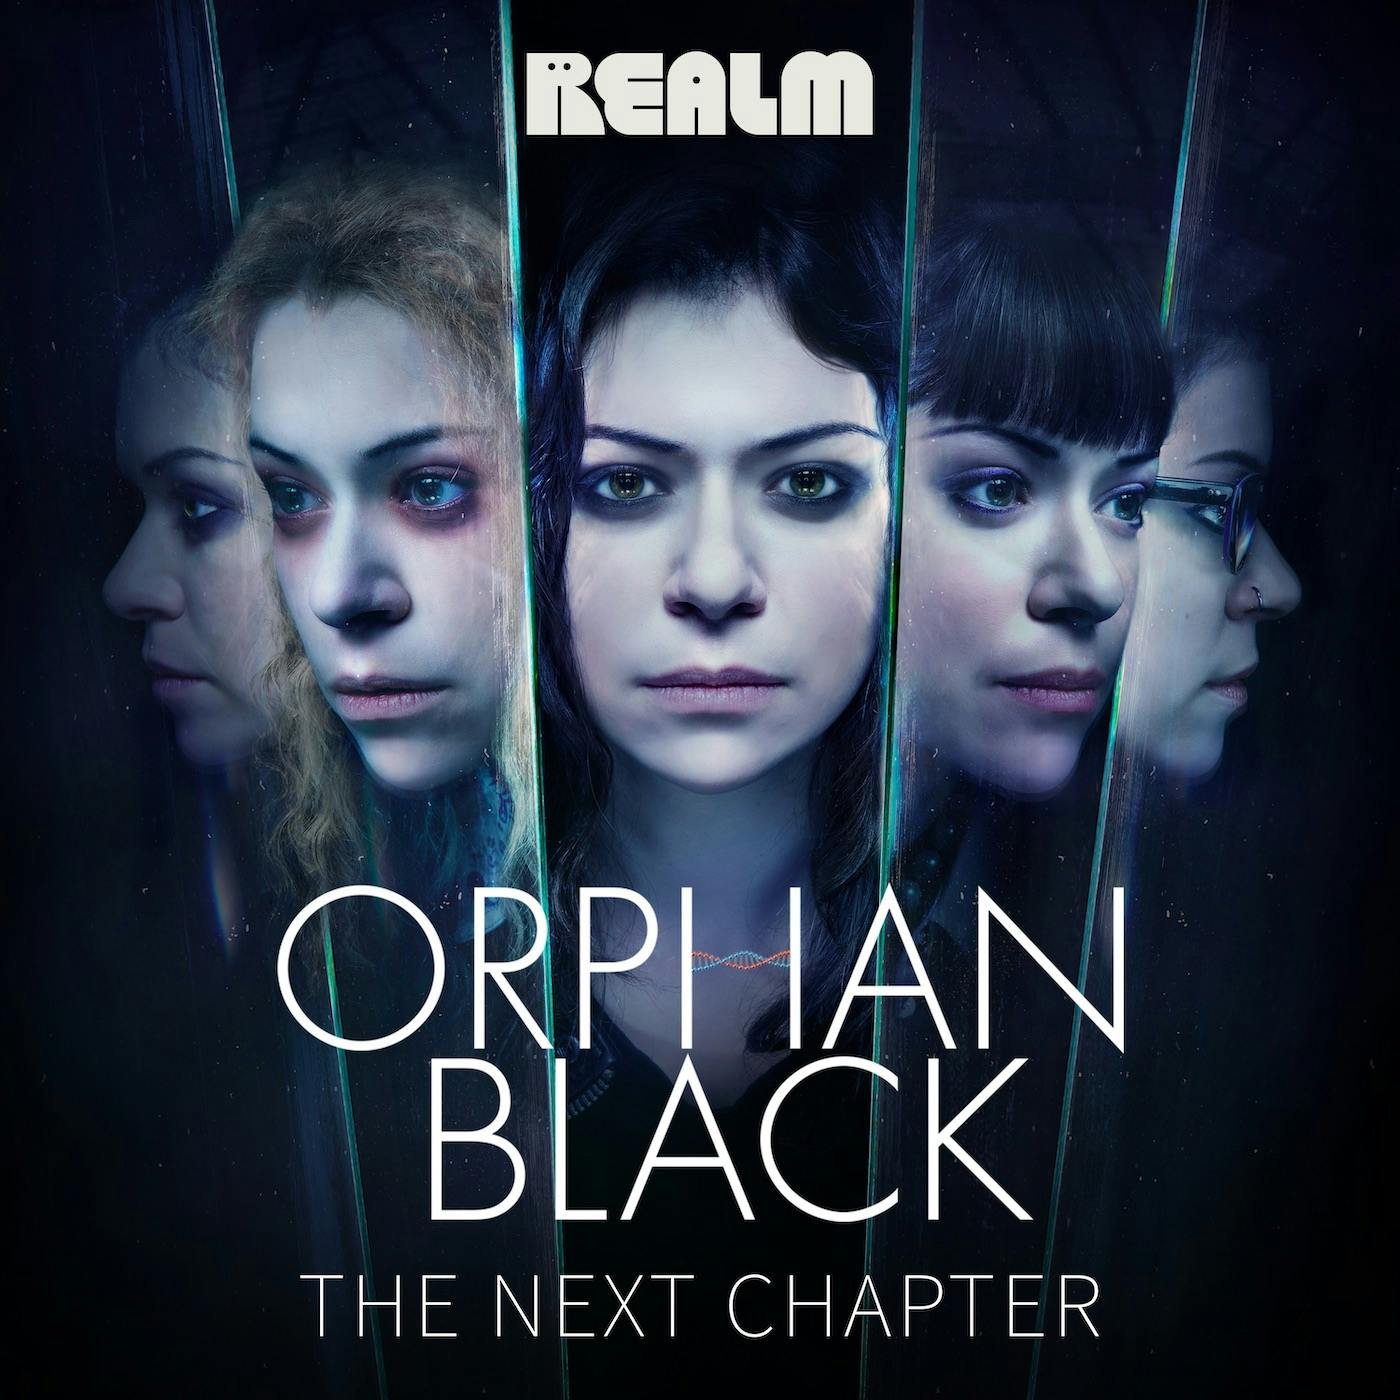 Presenting Orphan Black: The Next Chapter, Season 2 Episode 1